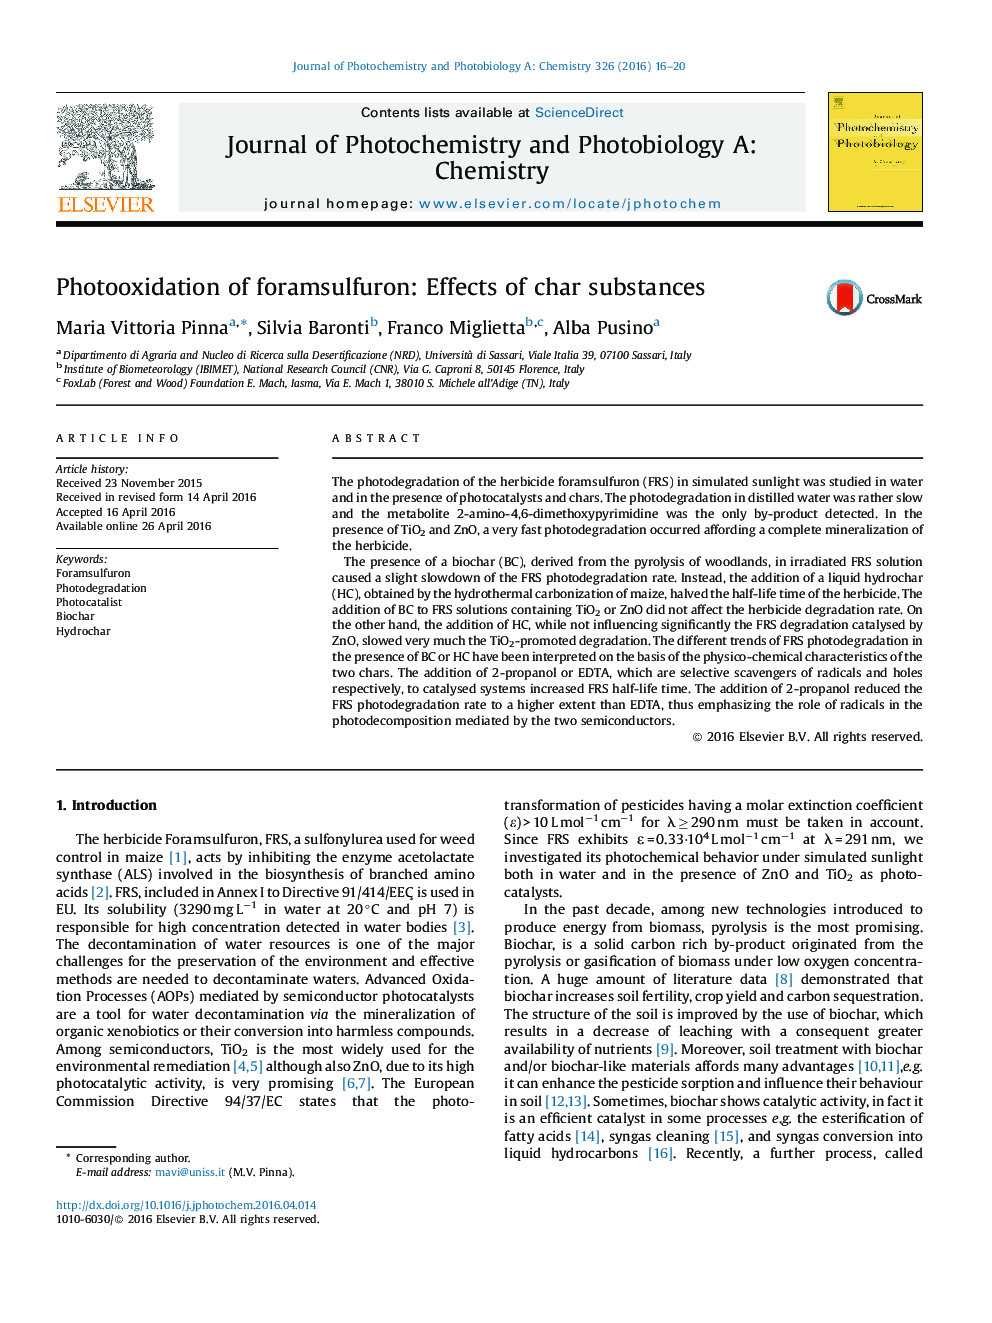 Photooxidation of foramsulfuron: Effects of char substances